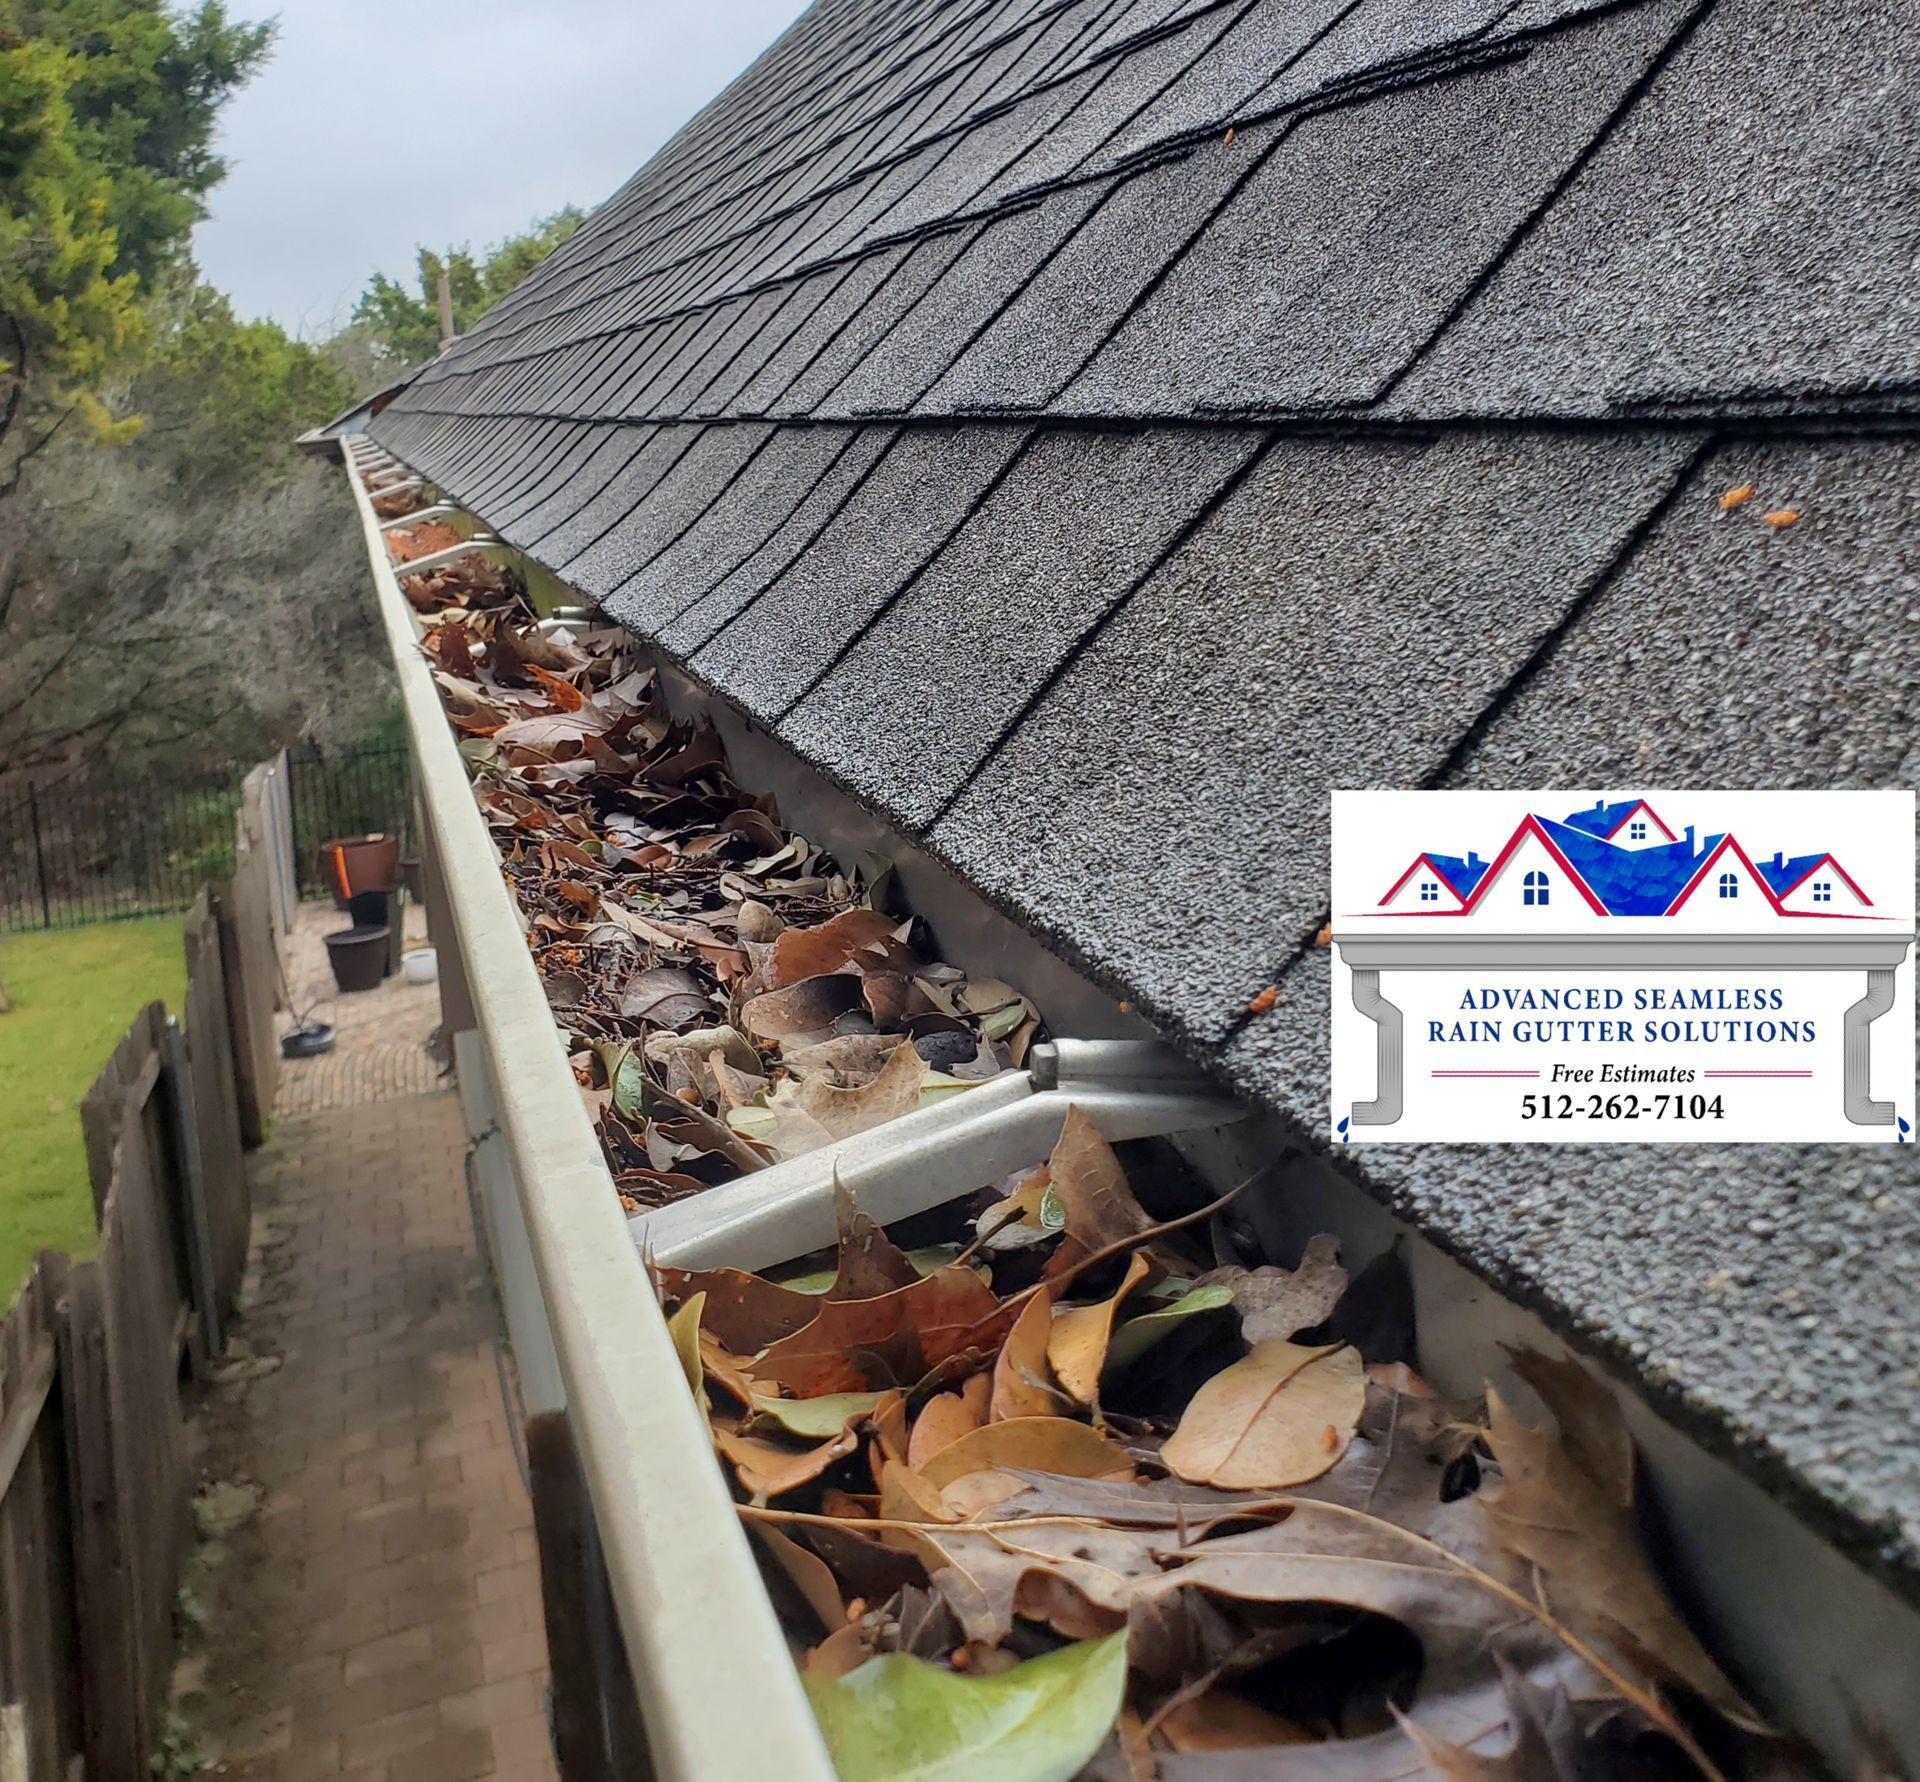 New Braunfels home with leaves clogging gutters with no leaf protection for the gutters